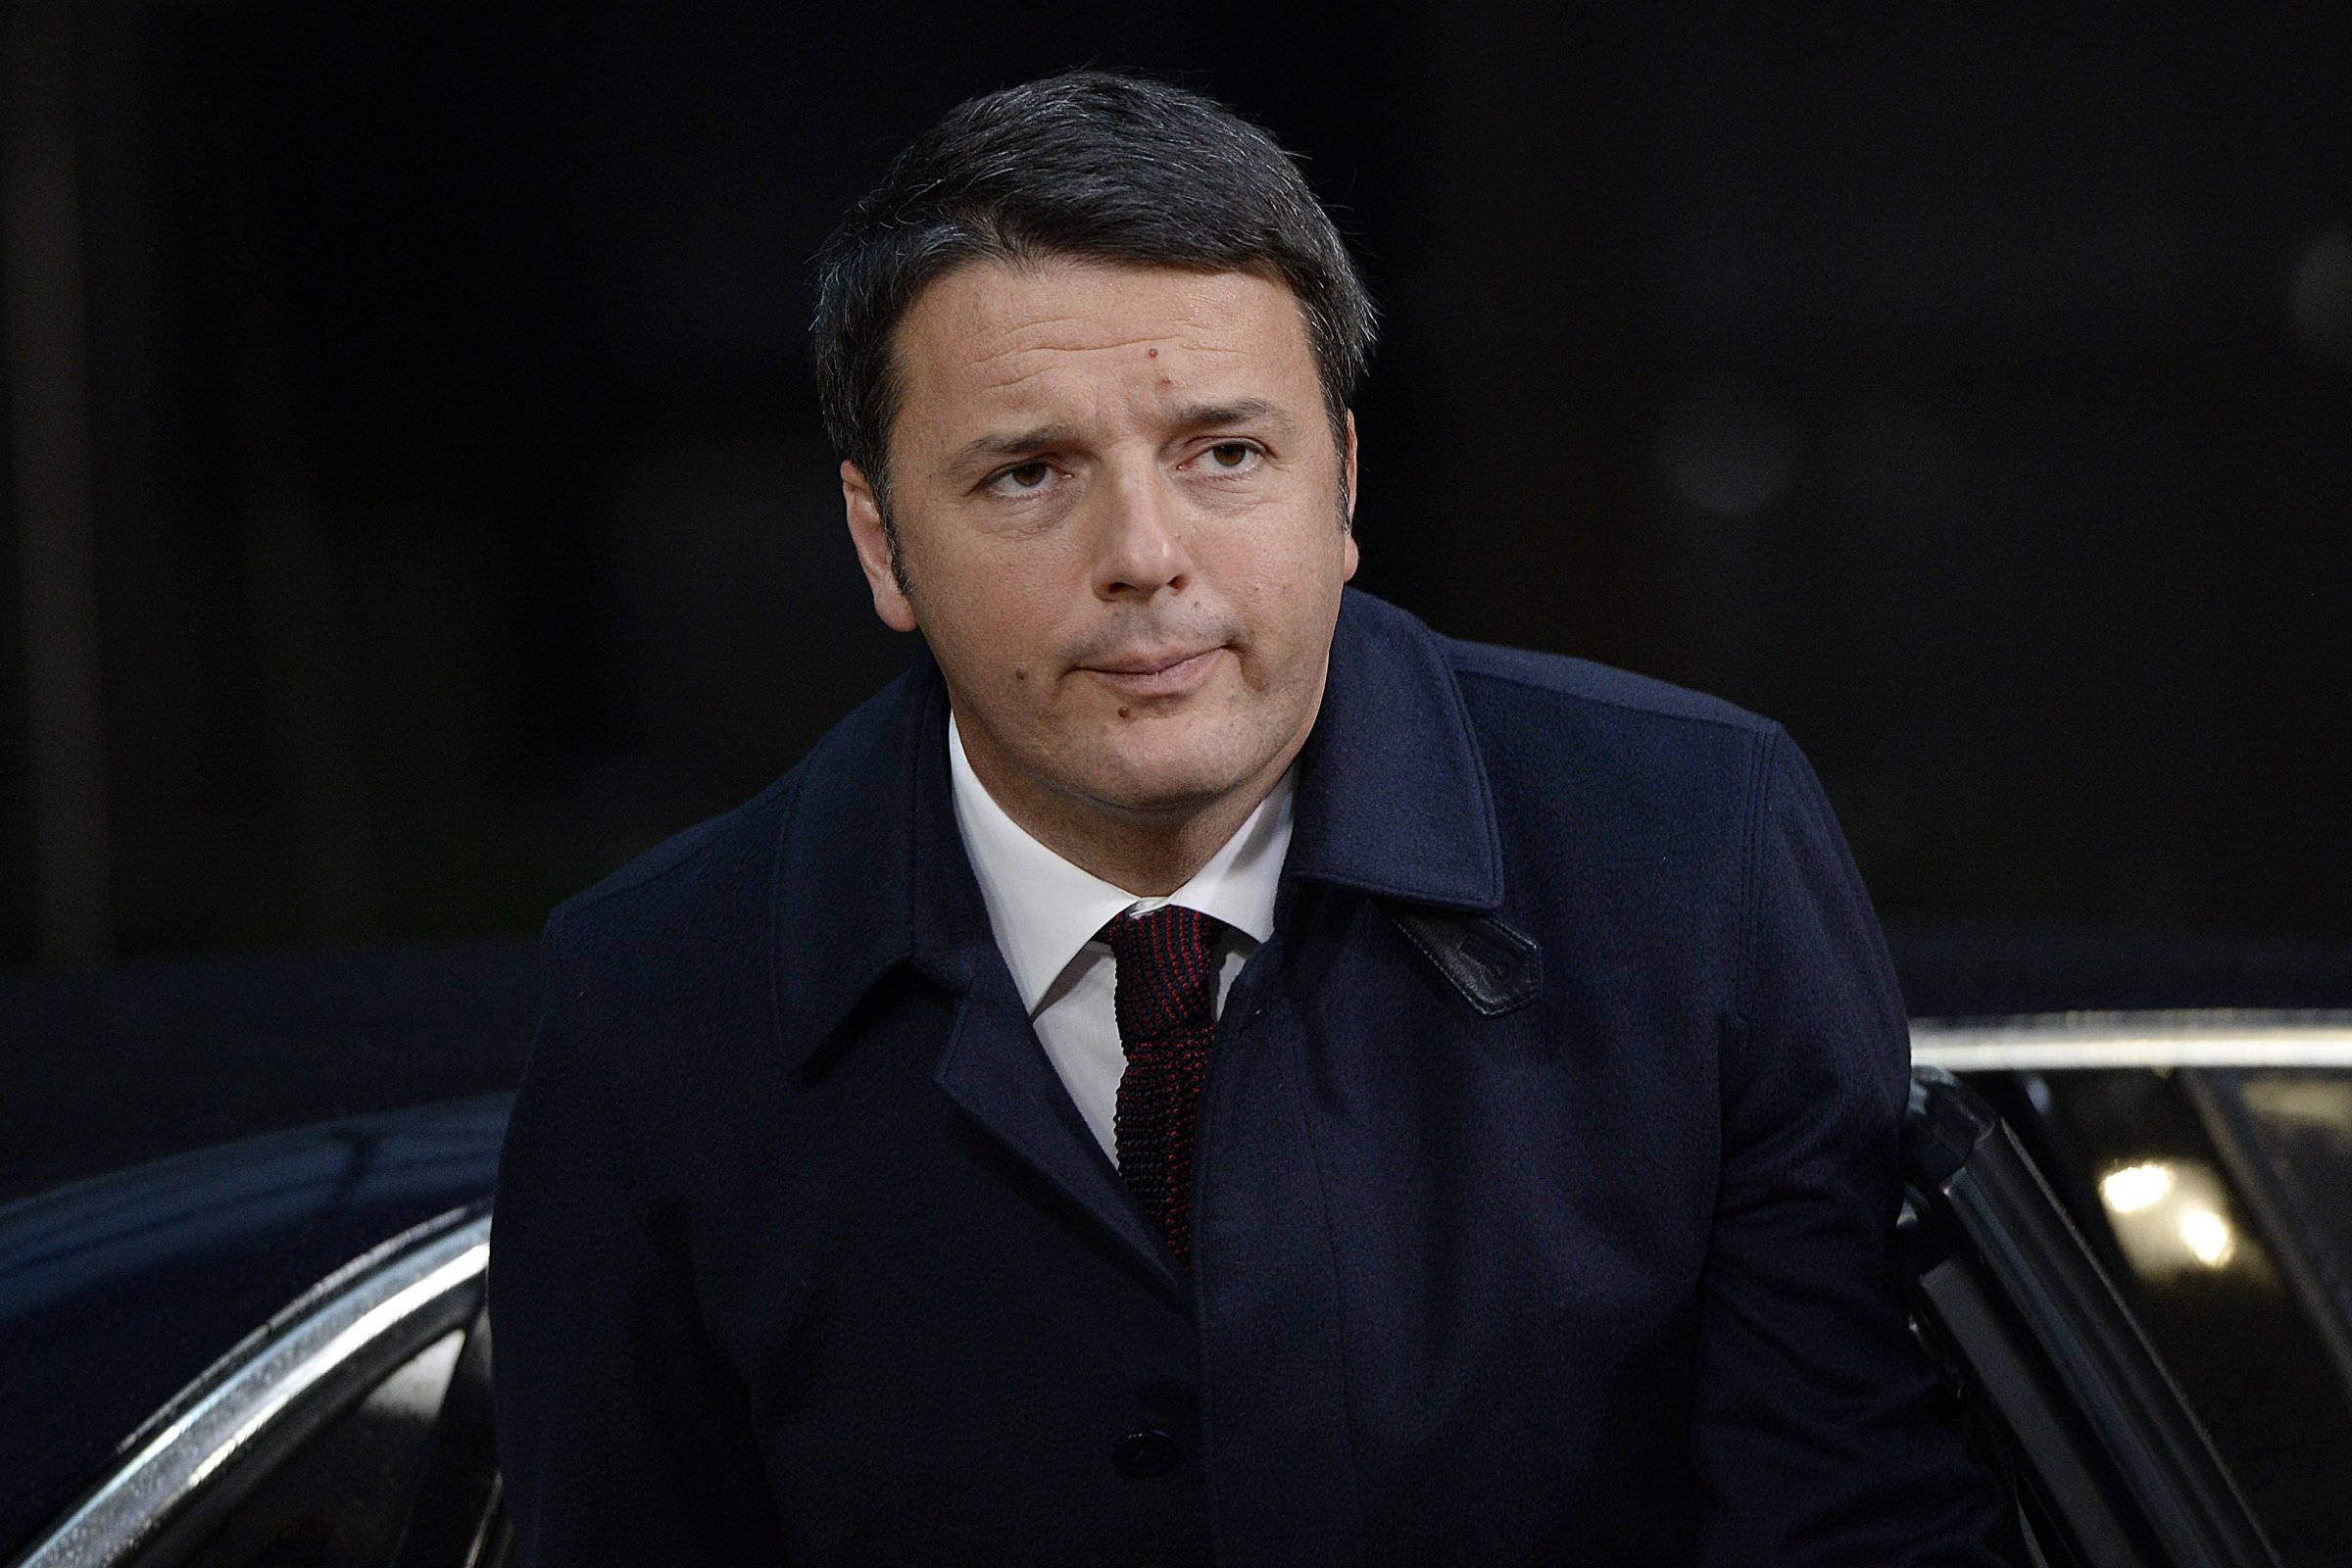 Italy's Prime minister Matteo Renzi at the EU headquarters in Brussels on Nov/ 29, 2015.